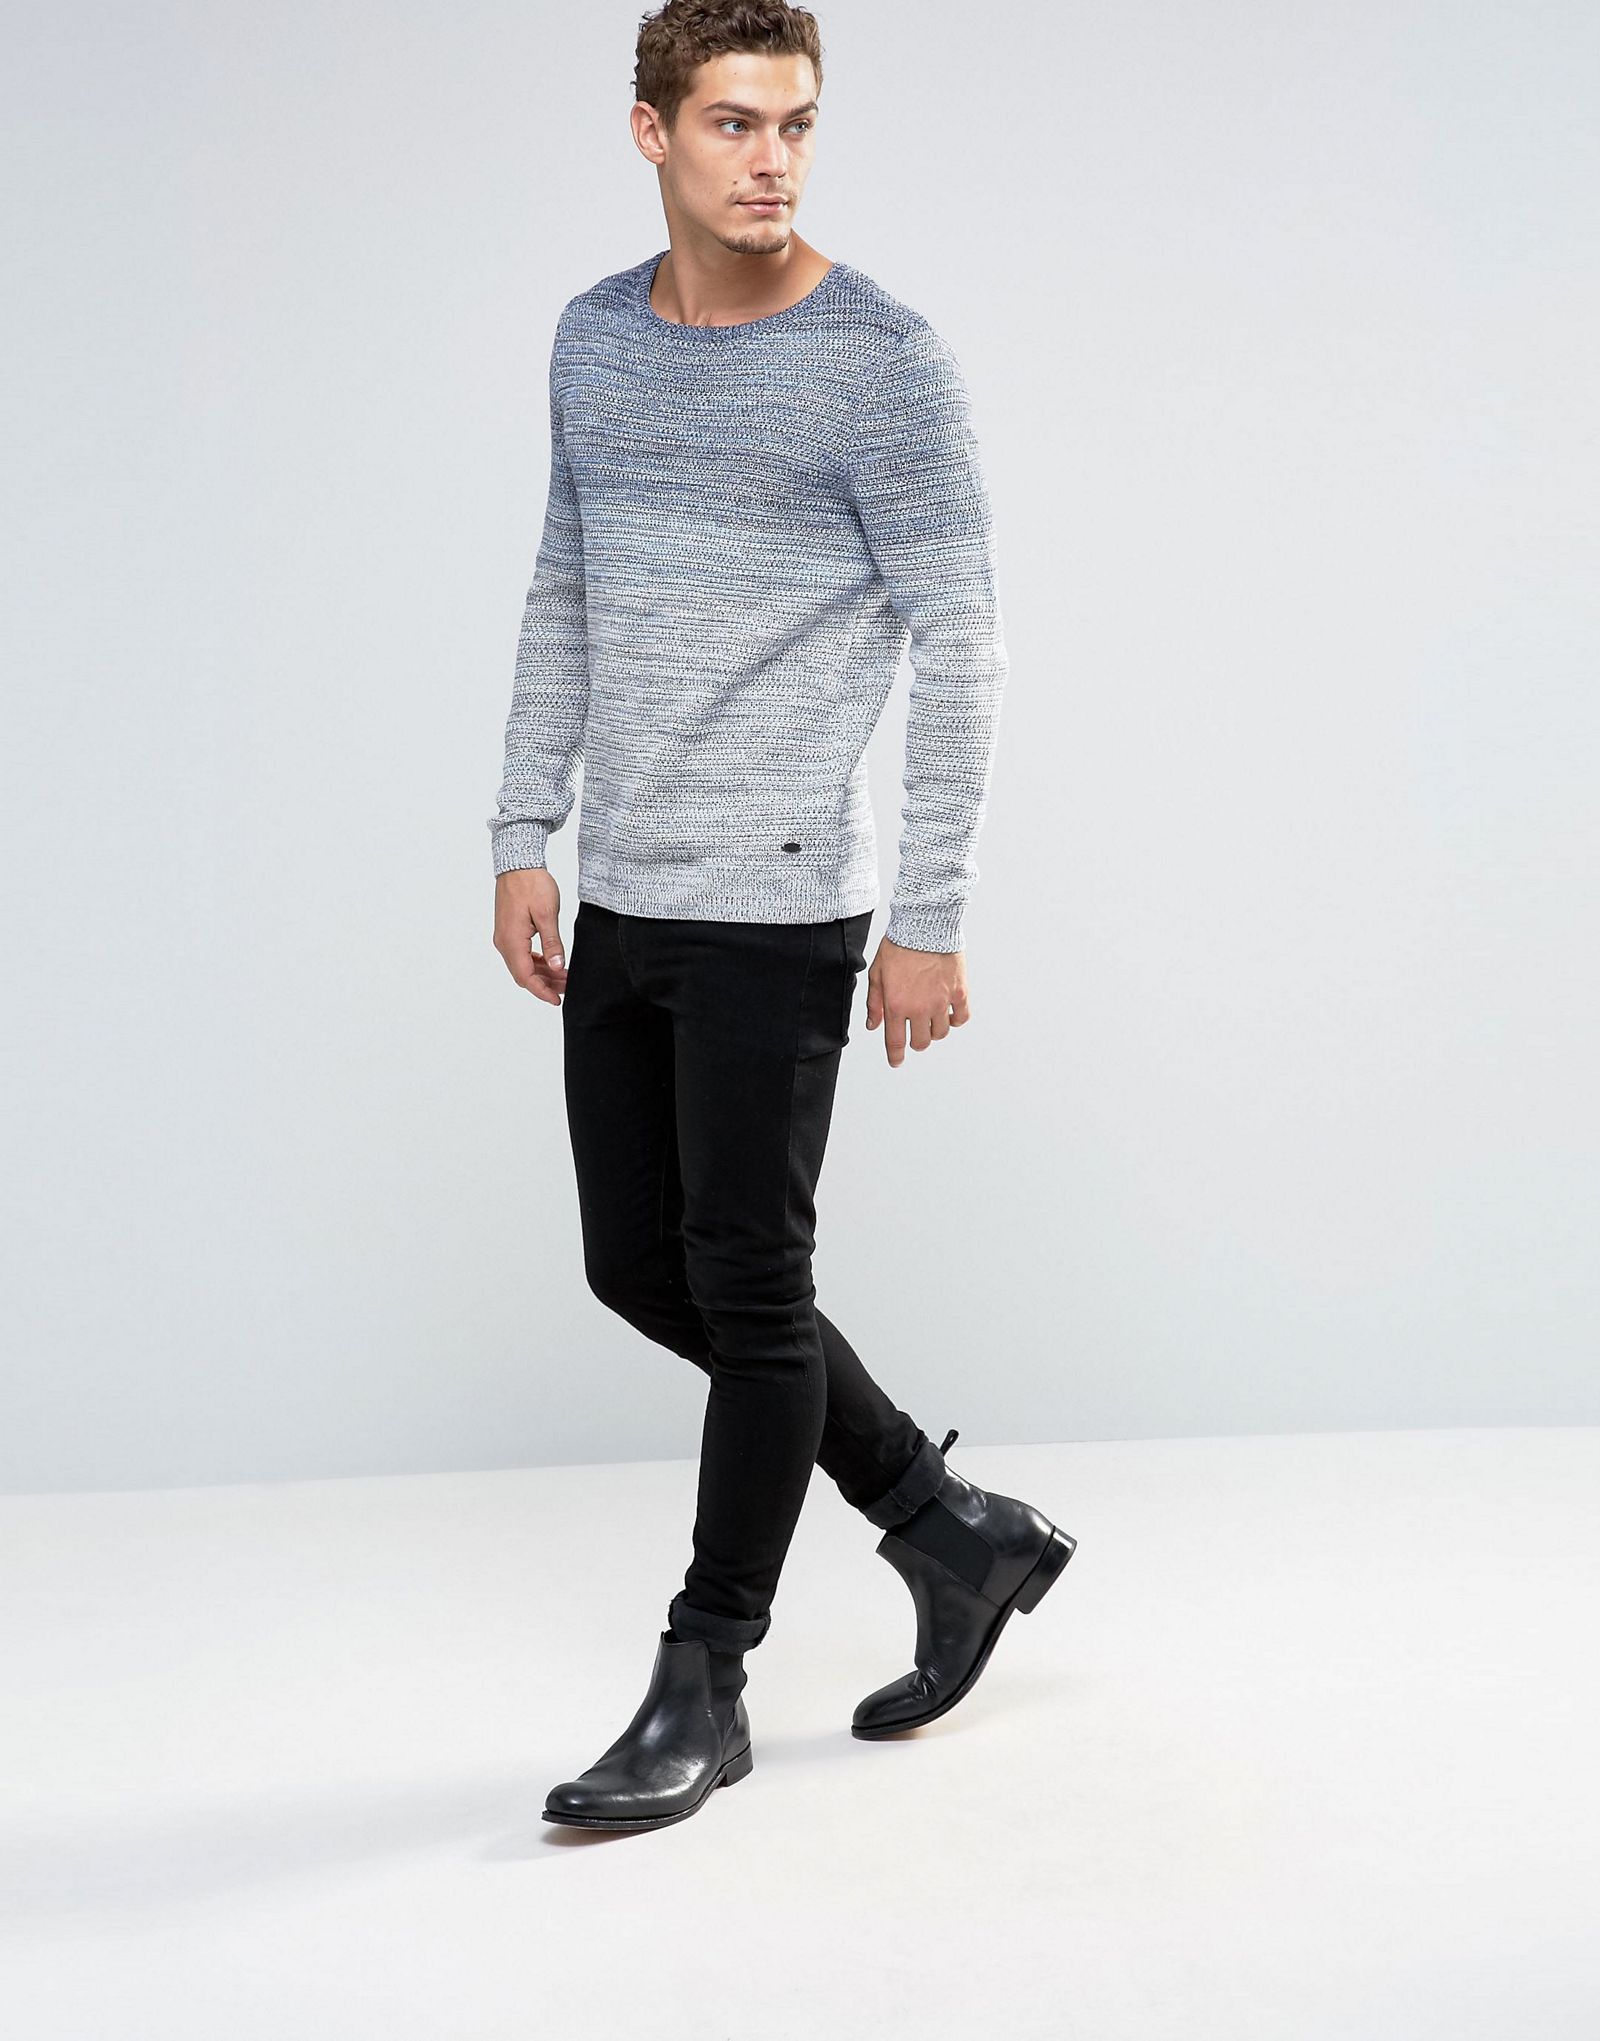 Esprit Crew Neck Knit with Gradient Yarn Fade